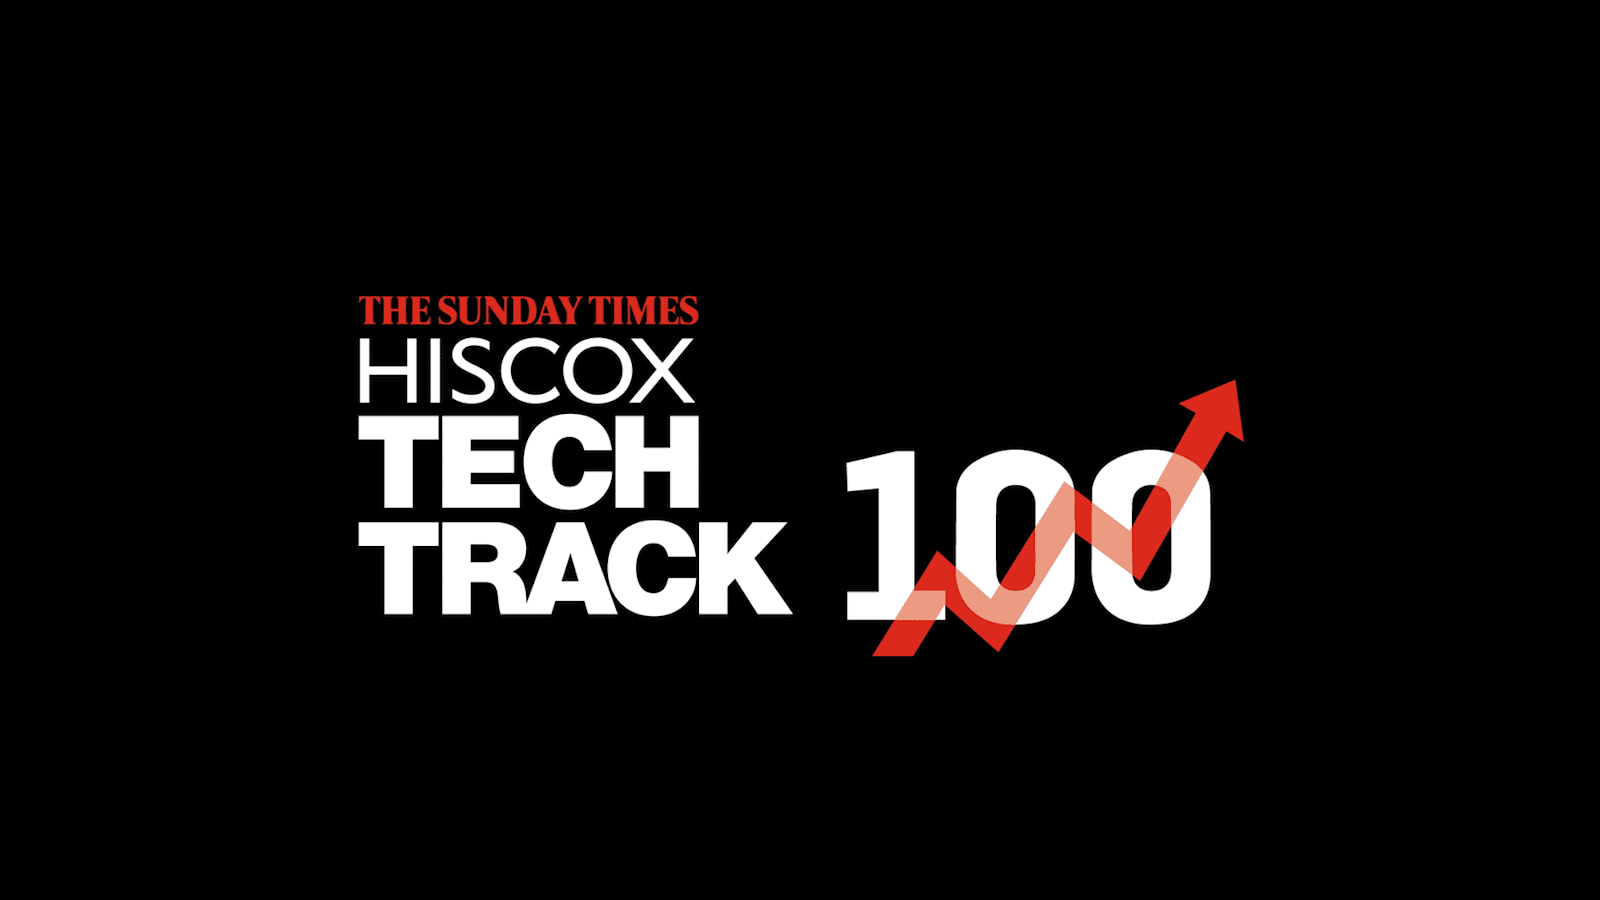 Hiscox Tech Track 100 with Positive Graph Image